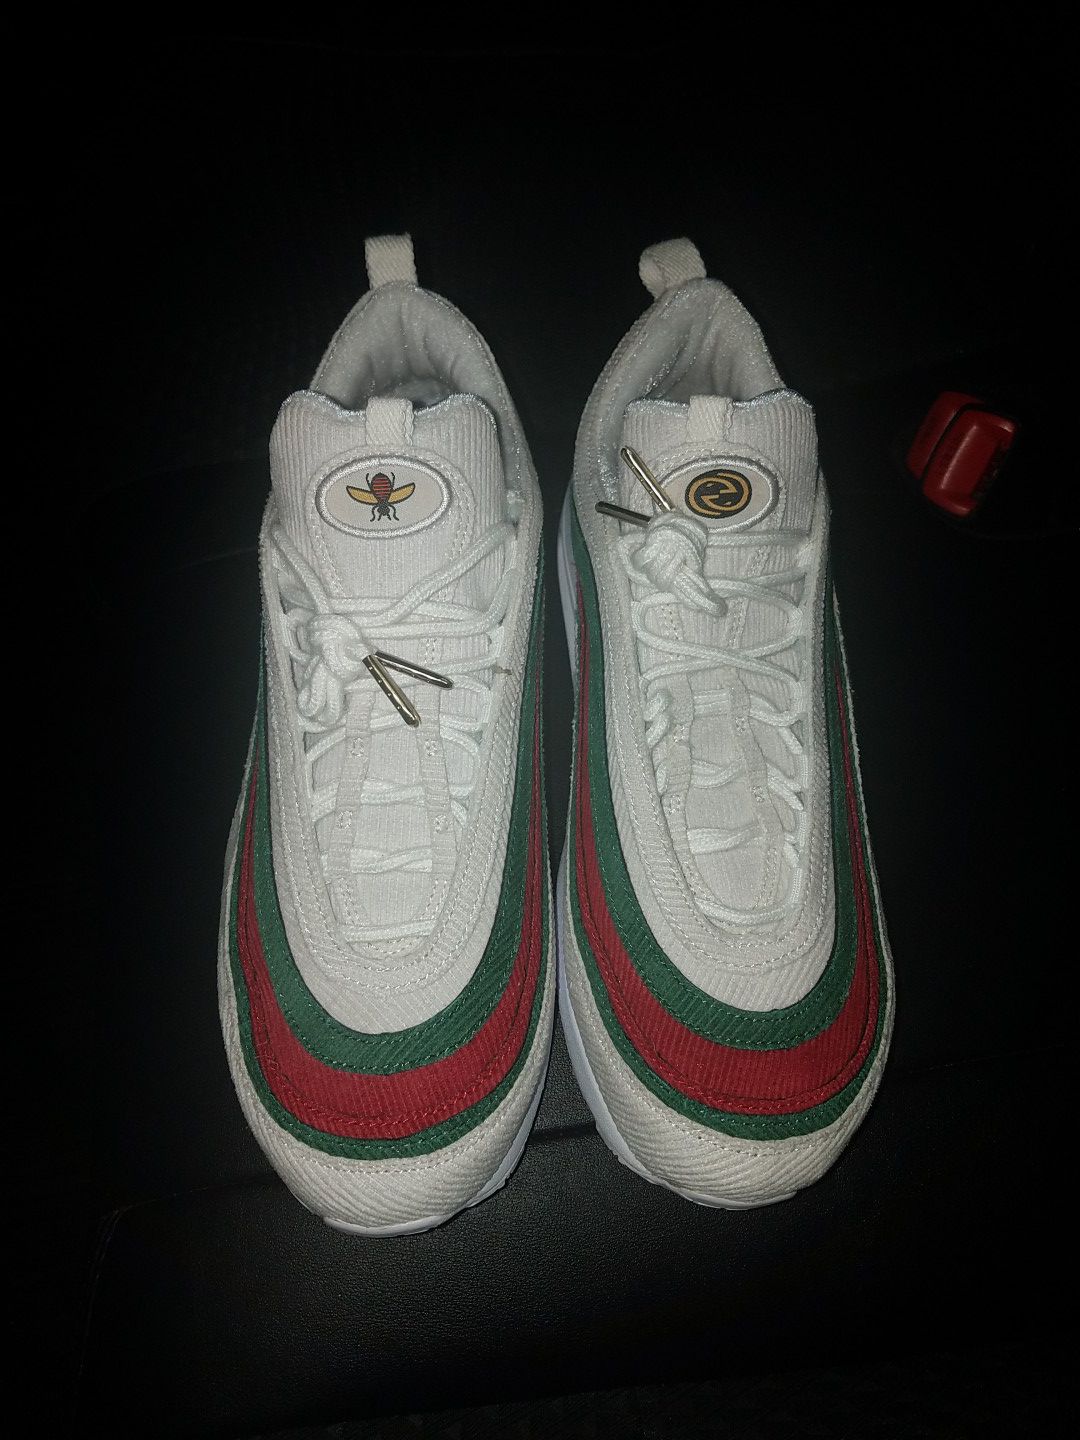 Custom x Air Max Hybrid White/Red/Green for Sale in Bronx, NY - OfferUp